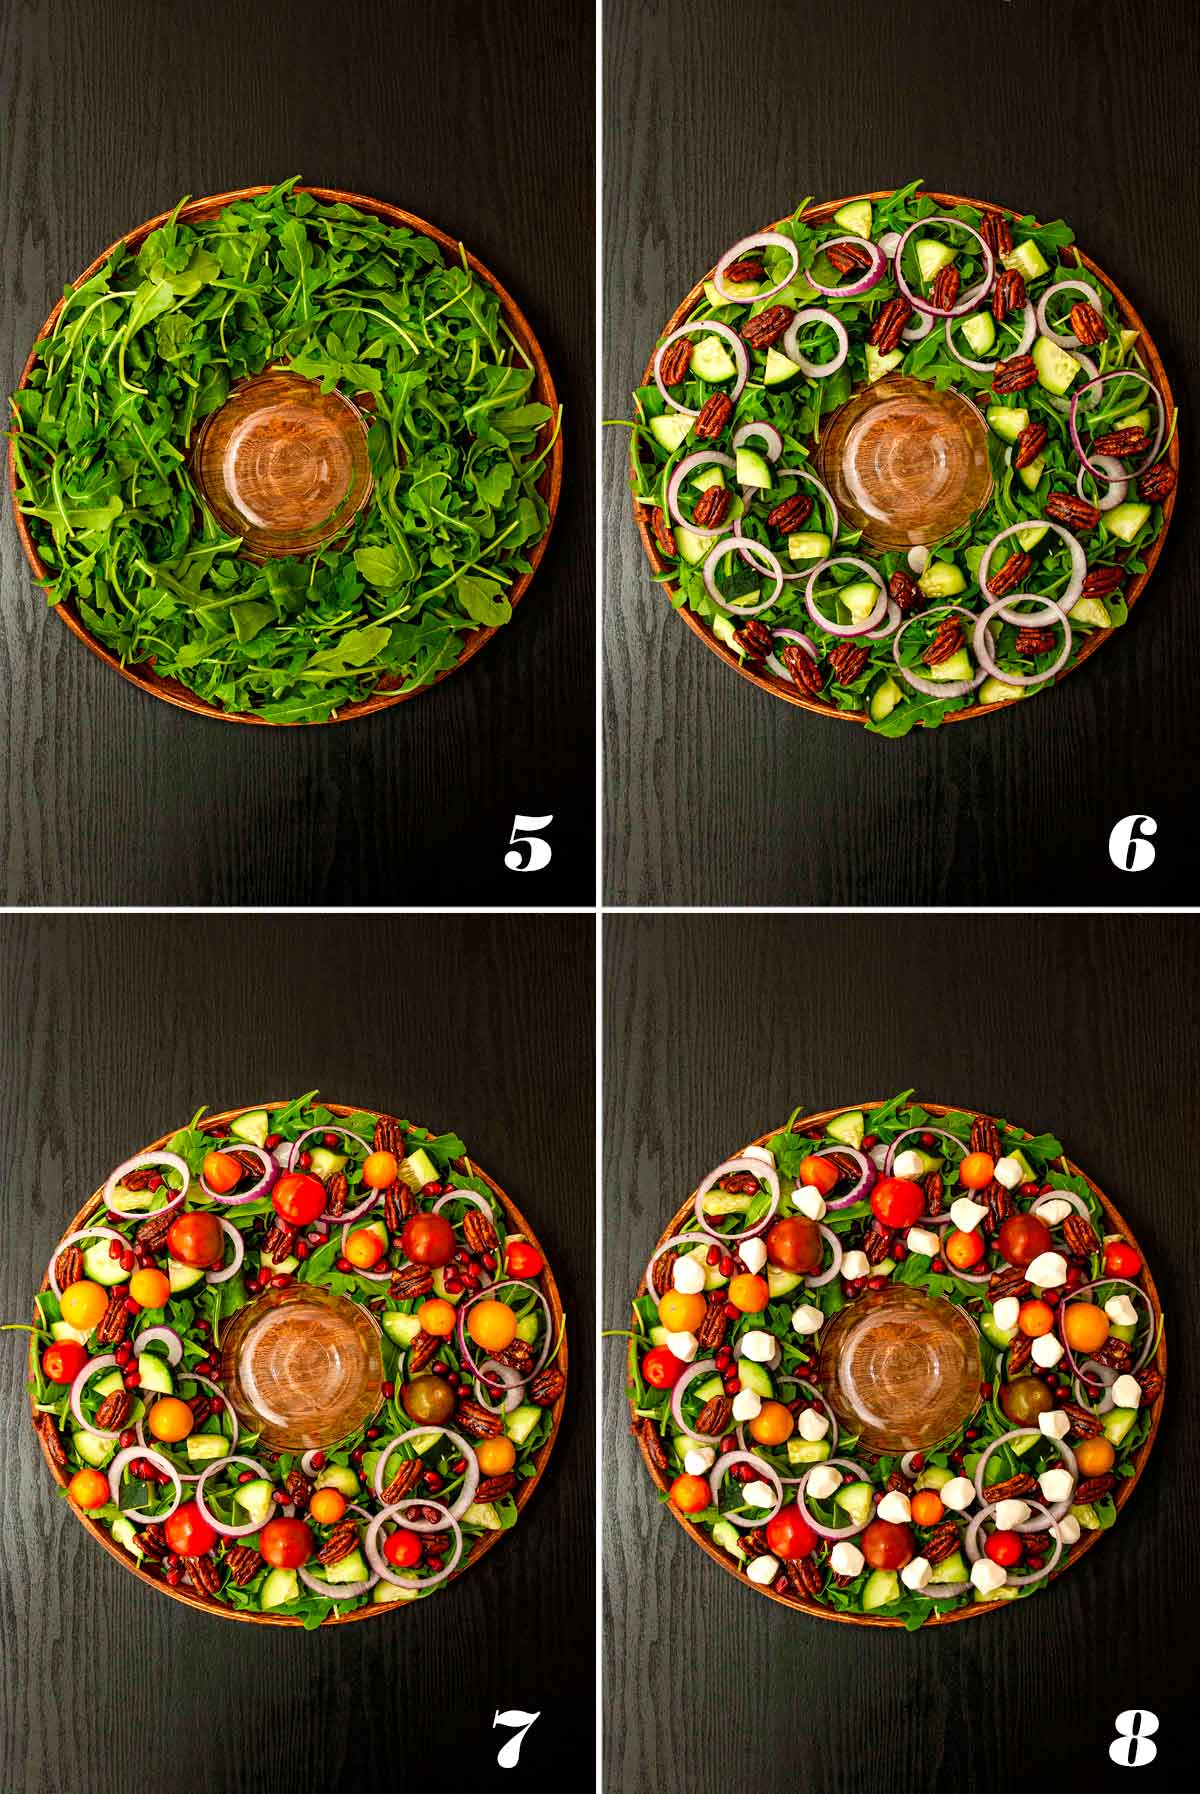 A collage of 4 numbered images showing how to assemble a Christmas salad.